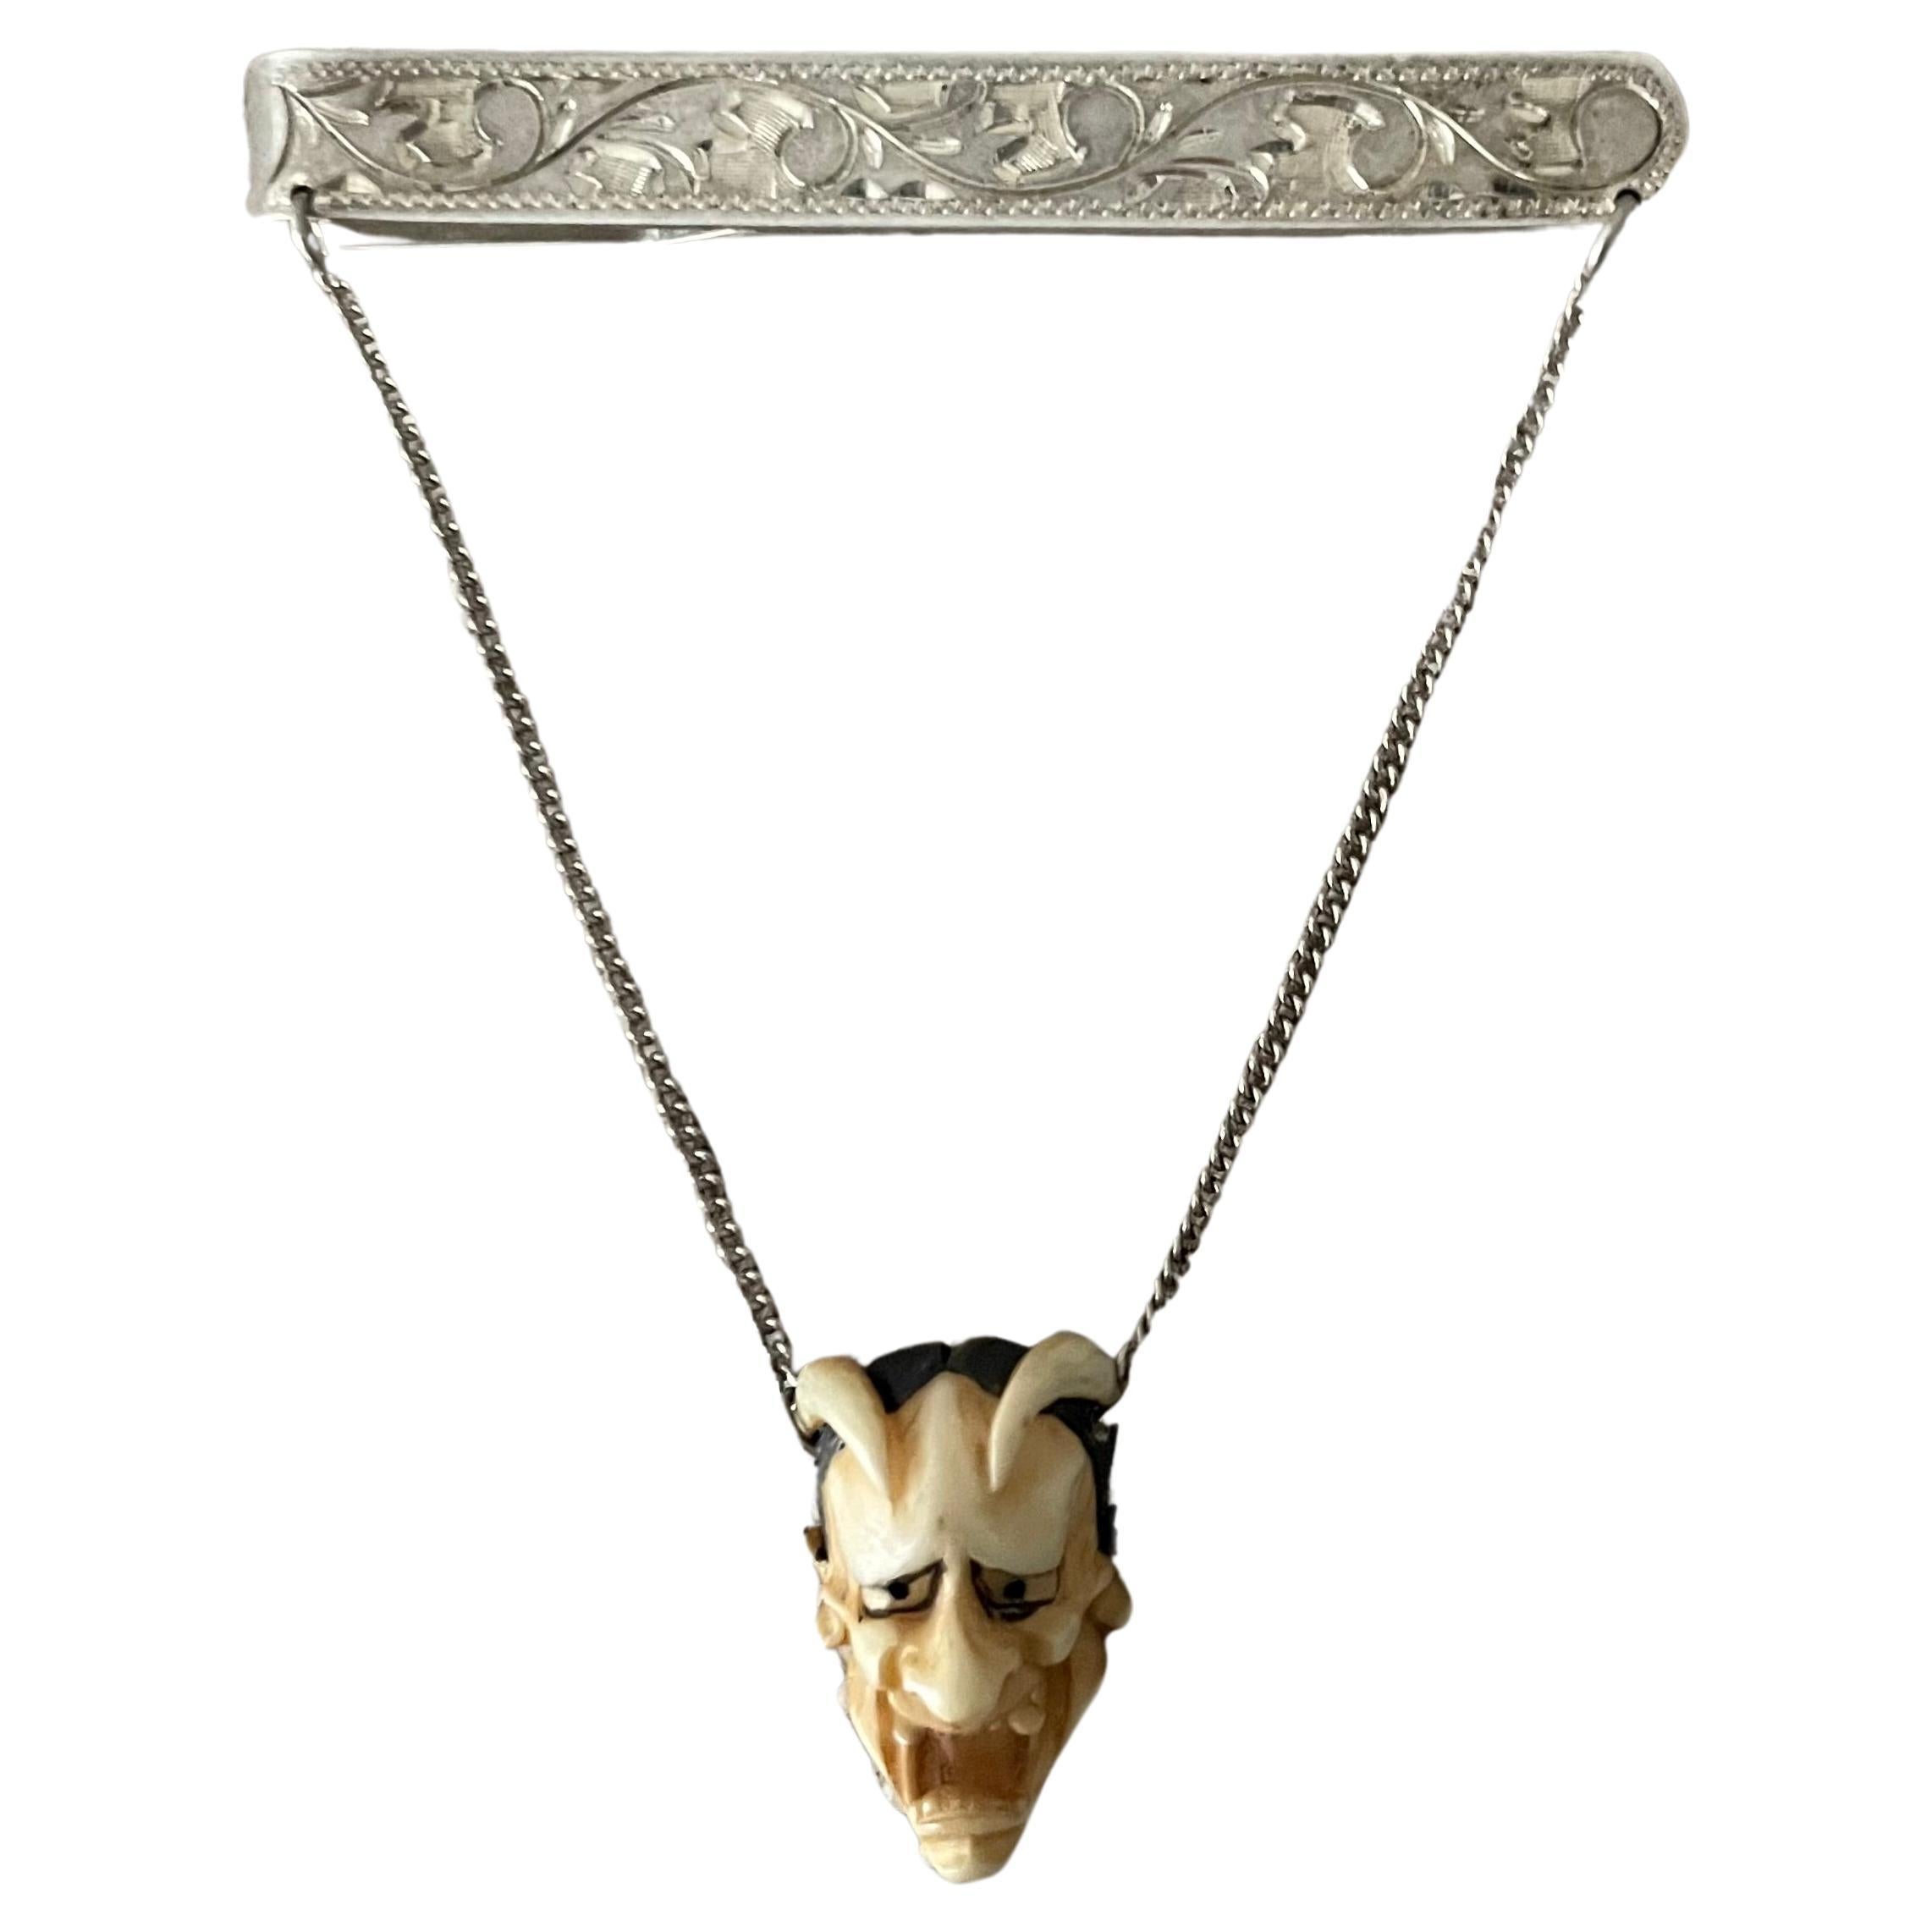 Silver 950 Japanese tie bar with hand painted bone devil Hannya Head.

Two chains from the intricately etched silver bar hold the classic Hannya head. Certainly a conversation starter, also a wonderful decorative piece for the vanity or dresser.